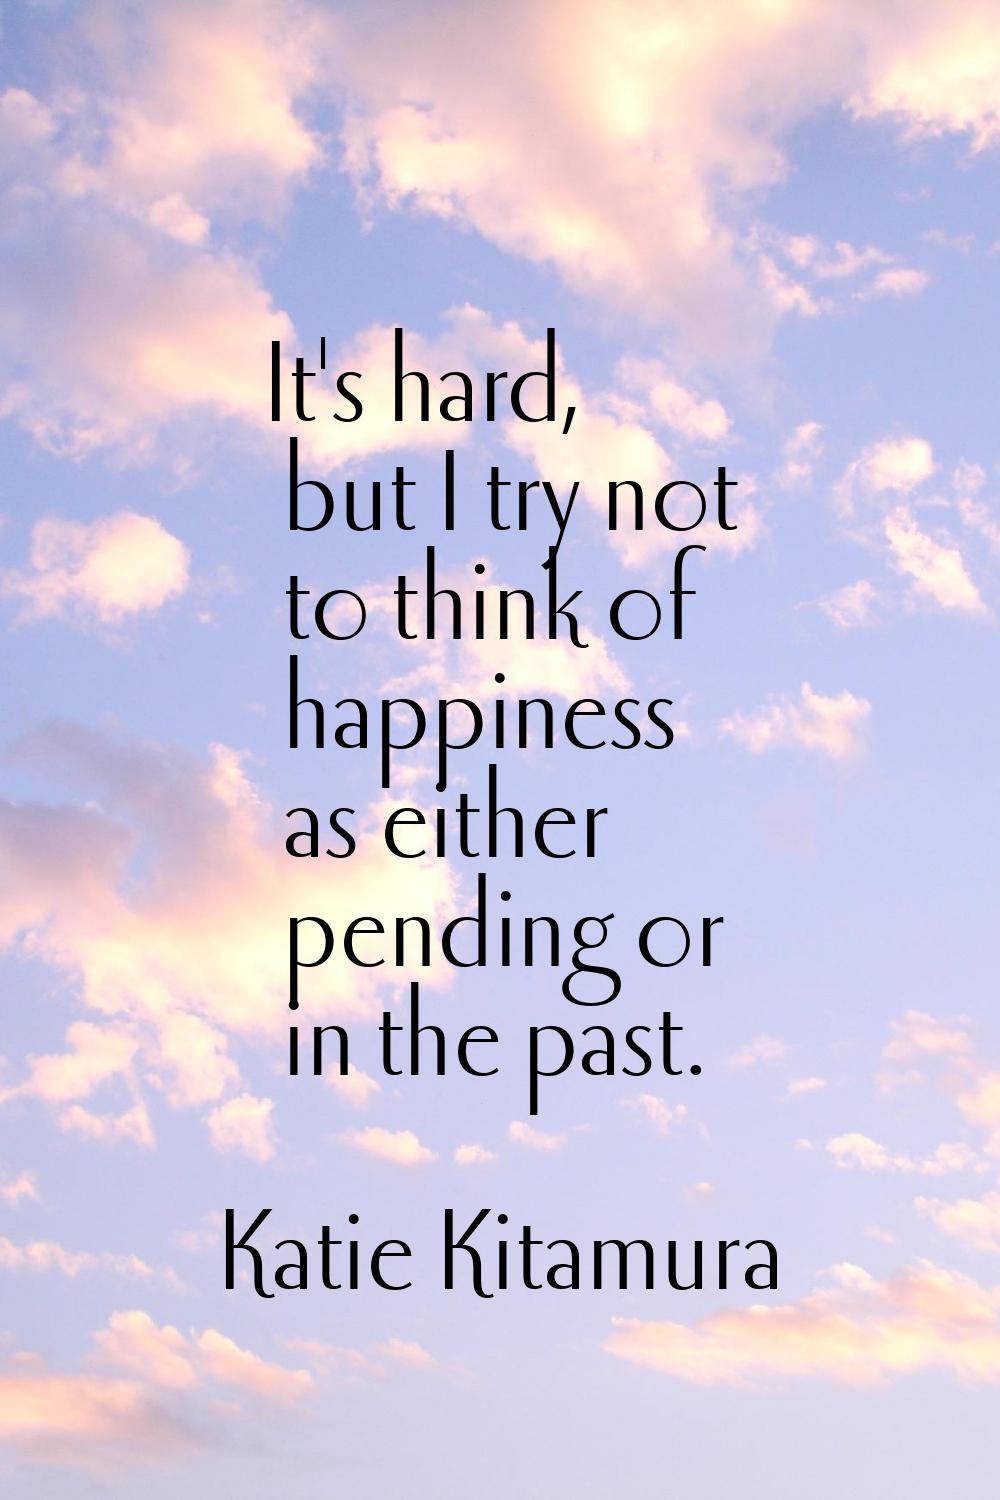 It's hard, but I try not to think of happiness as either pending or in the past.